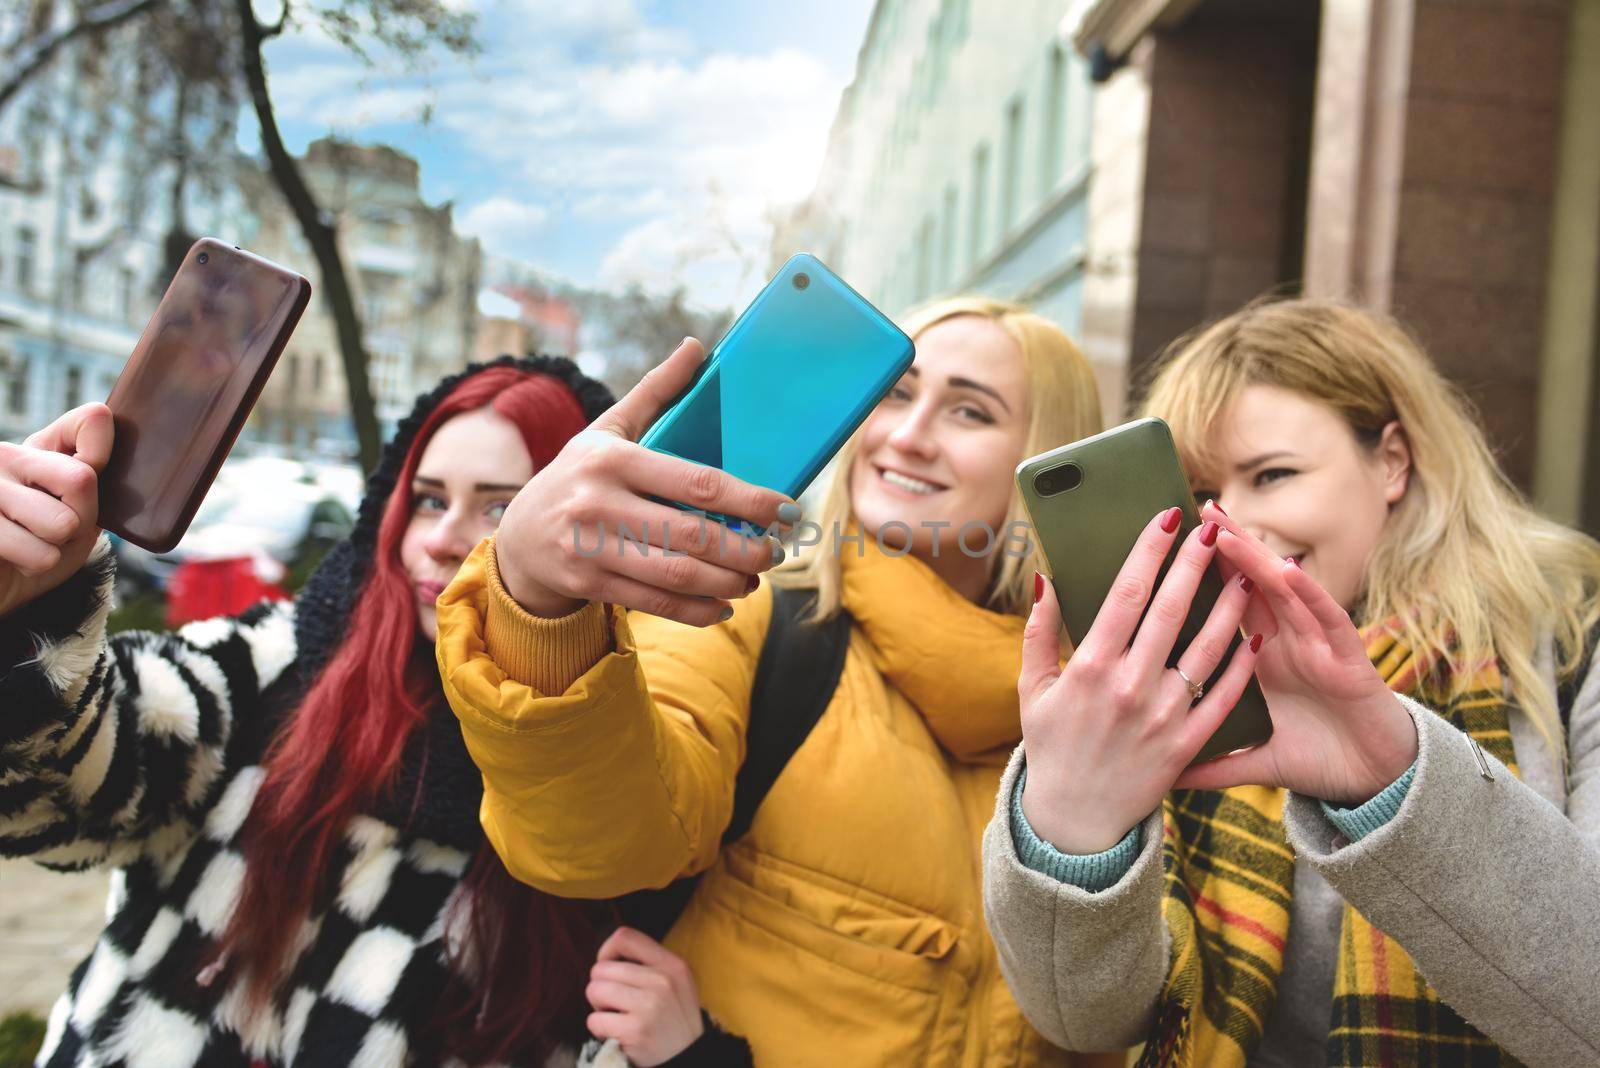 Three beautiful smiling young women walk in the city, using phone outdoors make selfies